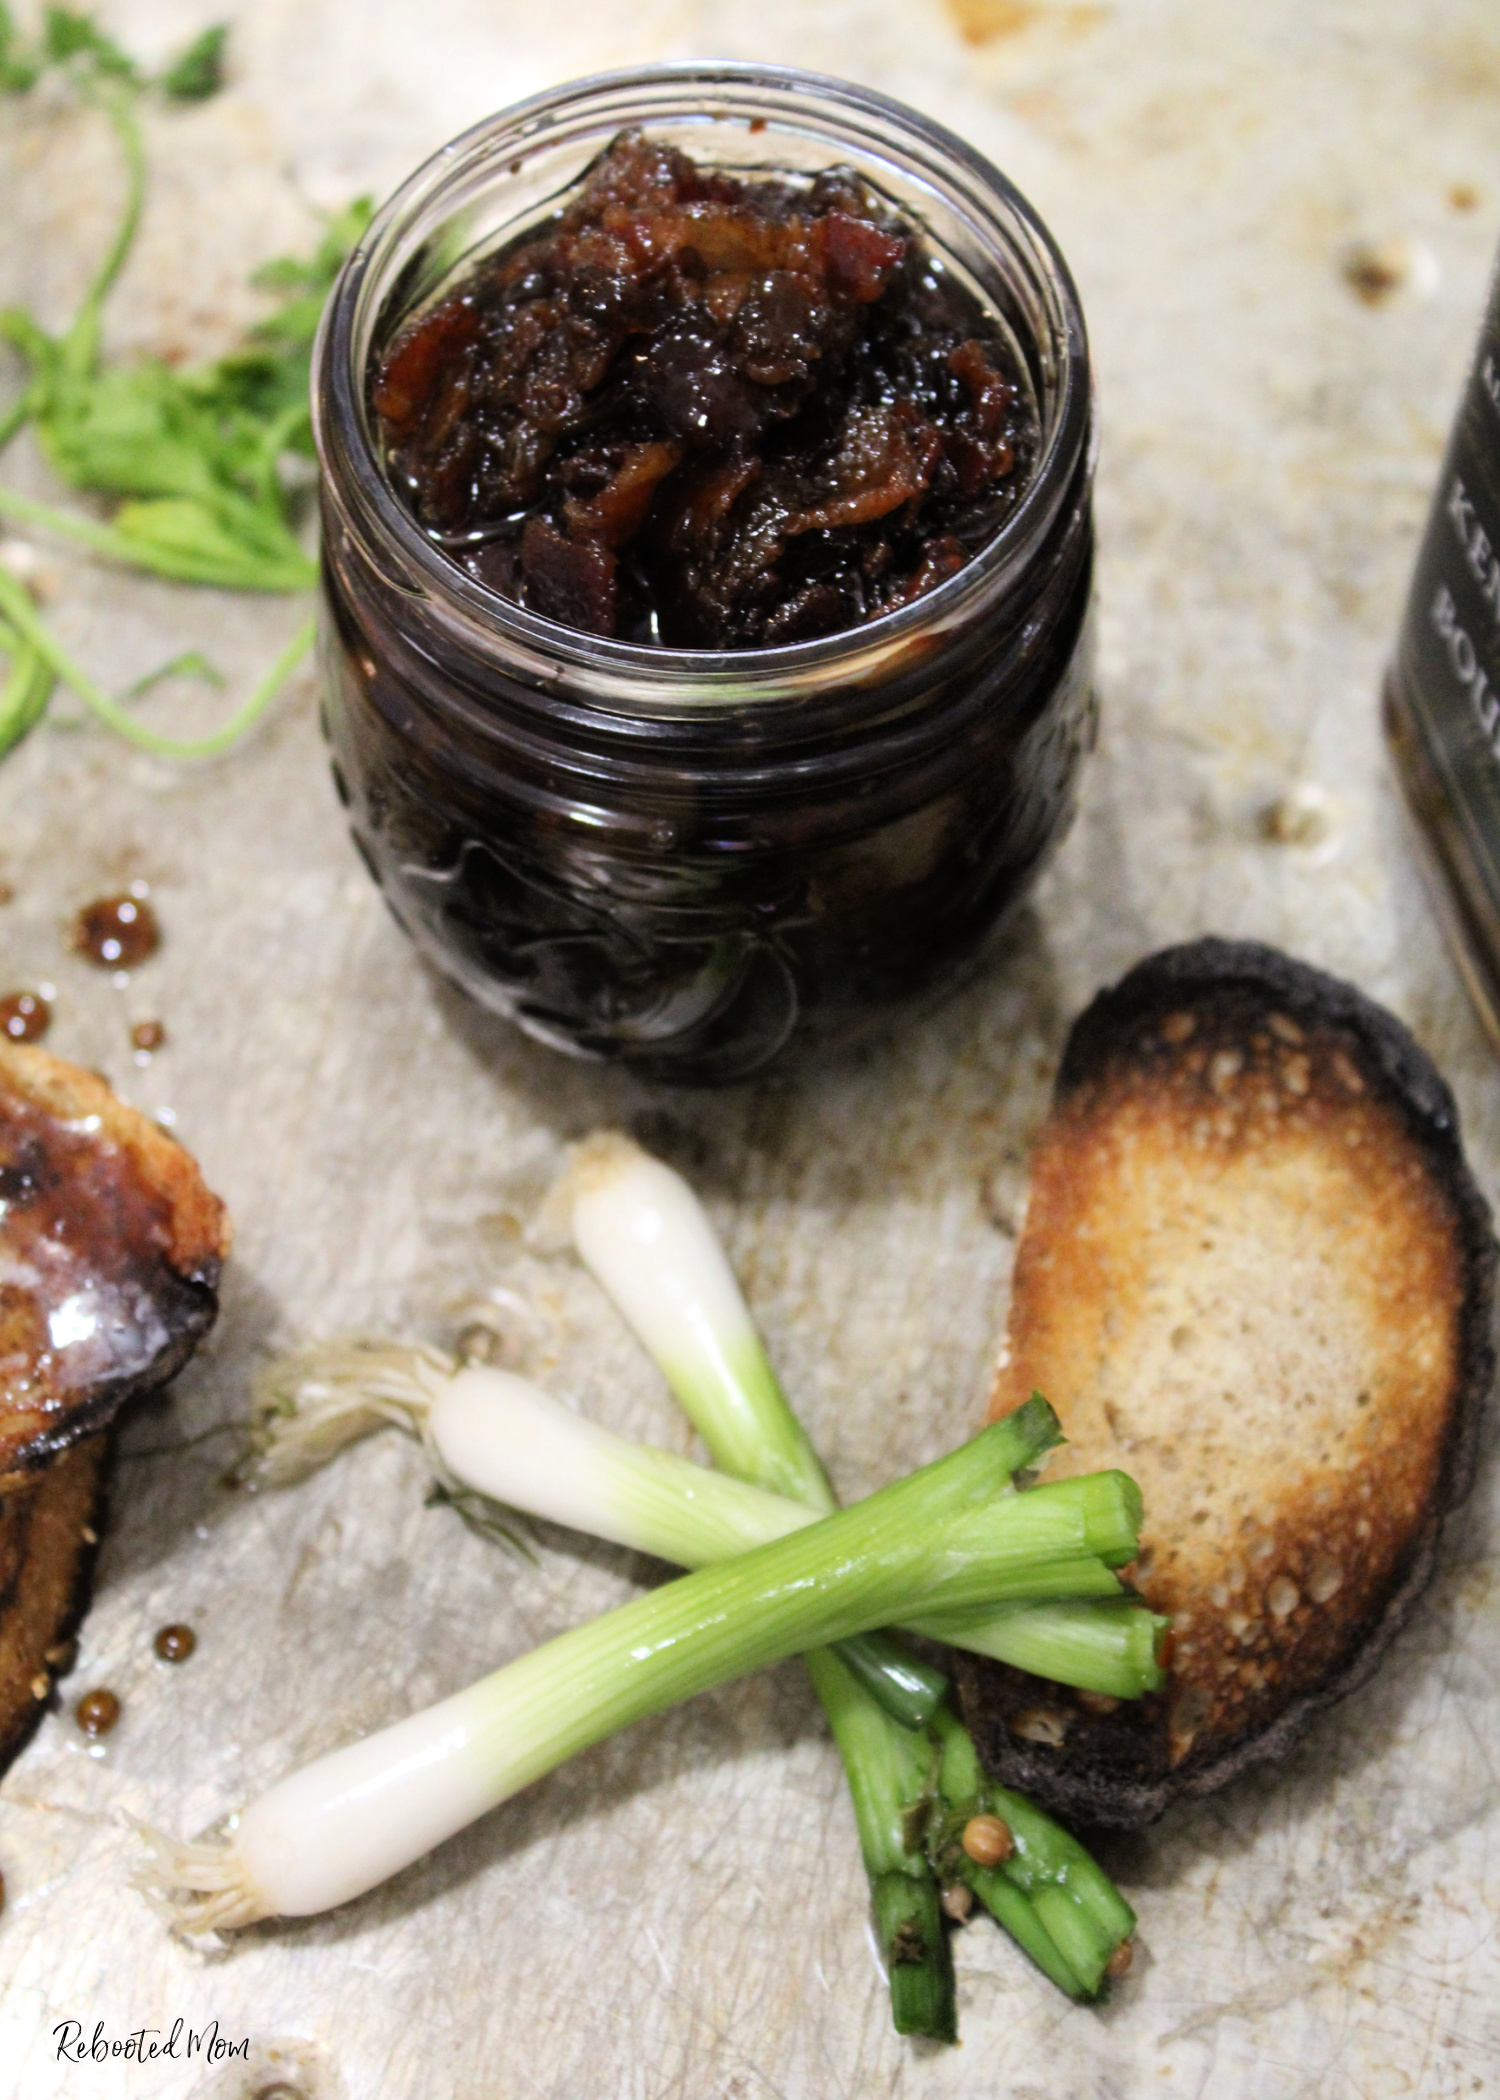 Bourbon Bacon Jam brings together both bourbon and bacon in a jam that's highly addictive and absolutely delicious!